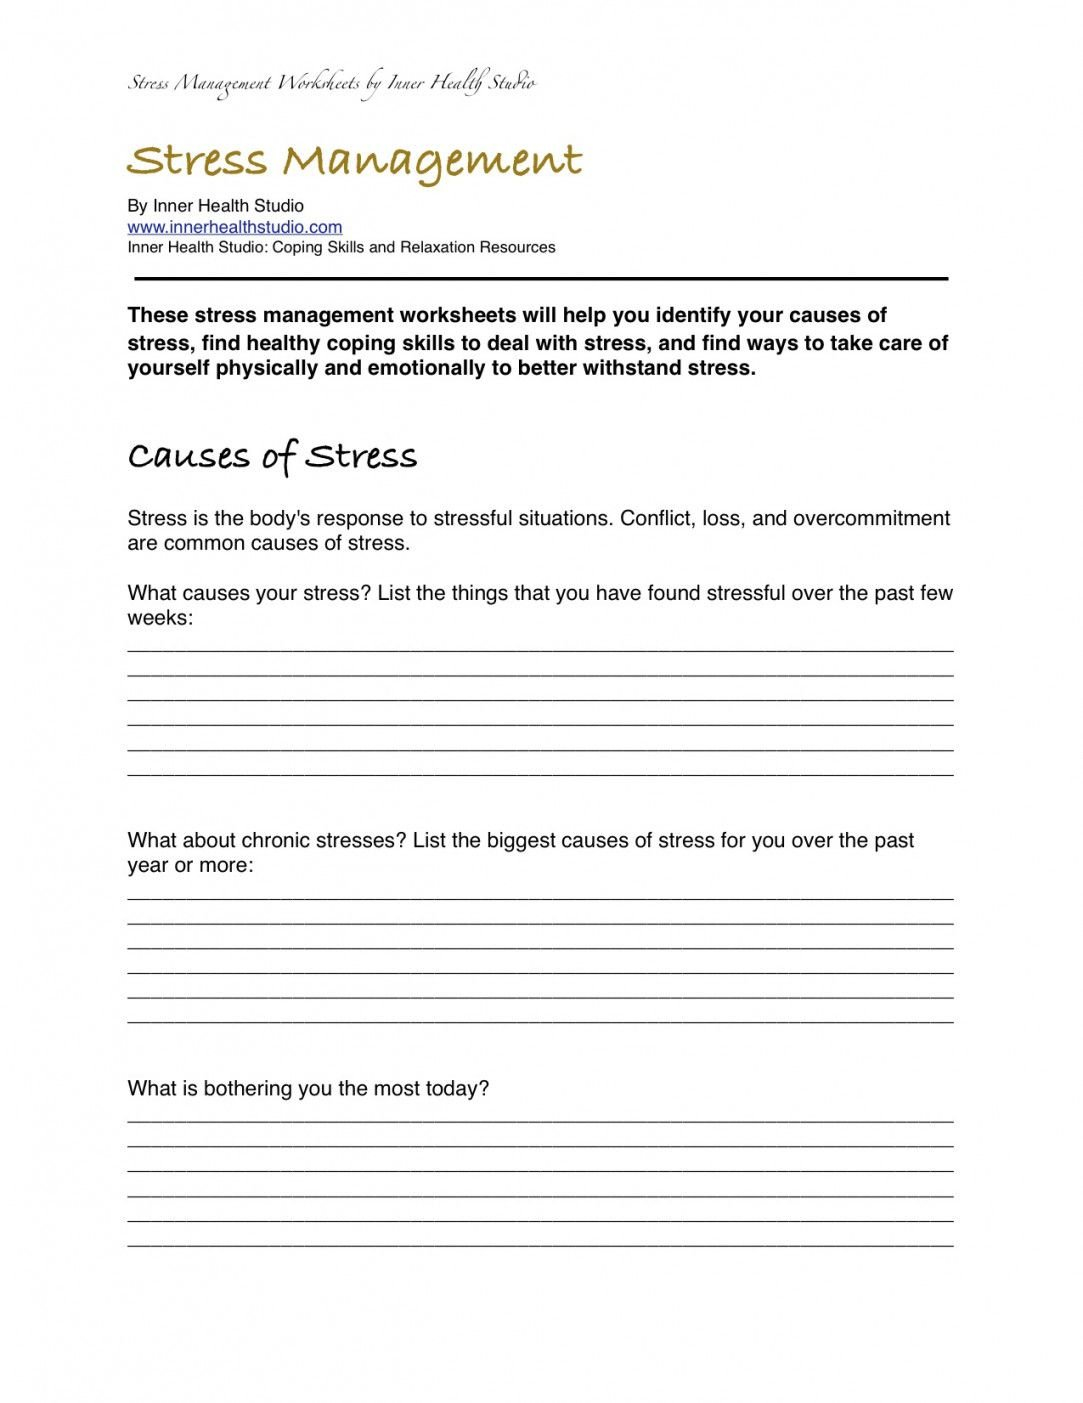 Stress Management Worksheets Pdf With For Highschool Students Plus In Stress Management Worksheets Pdf